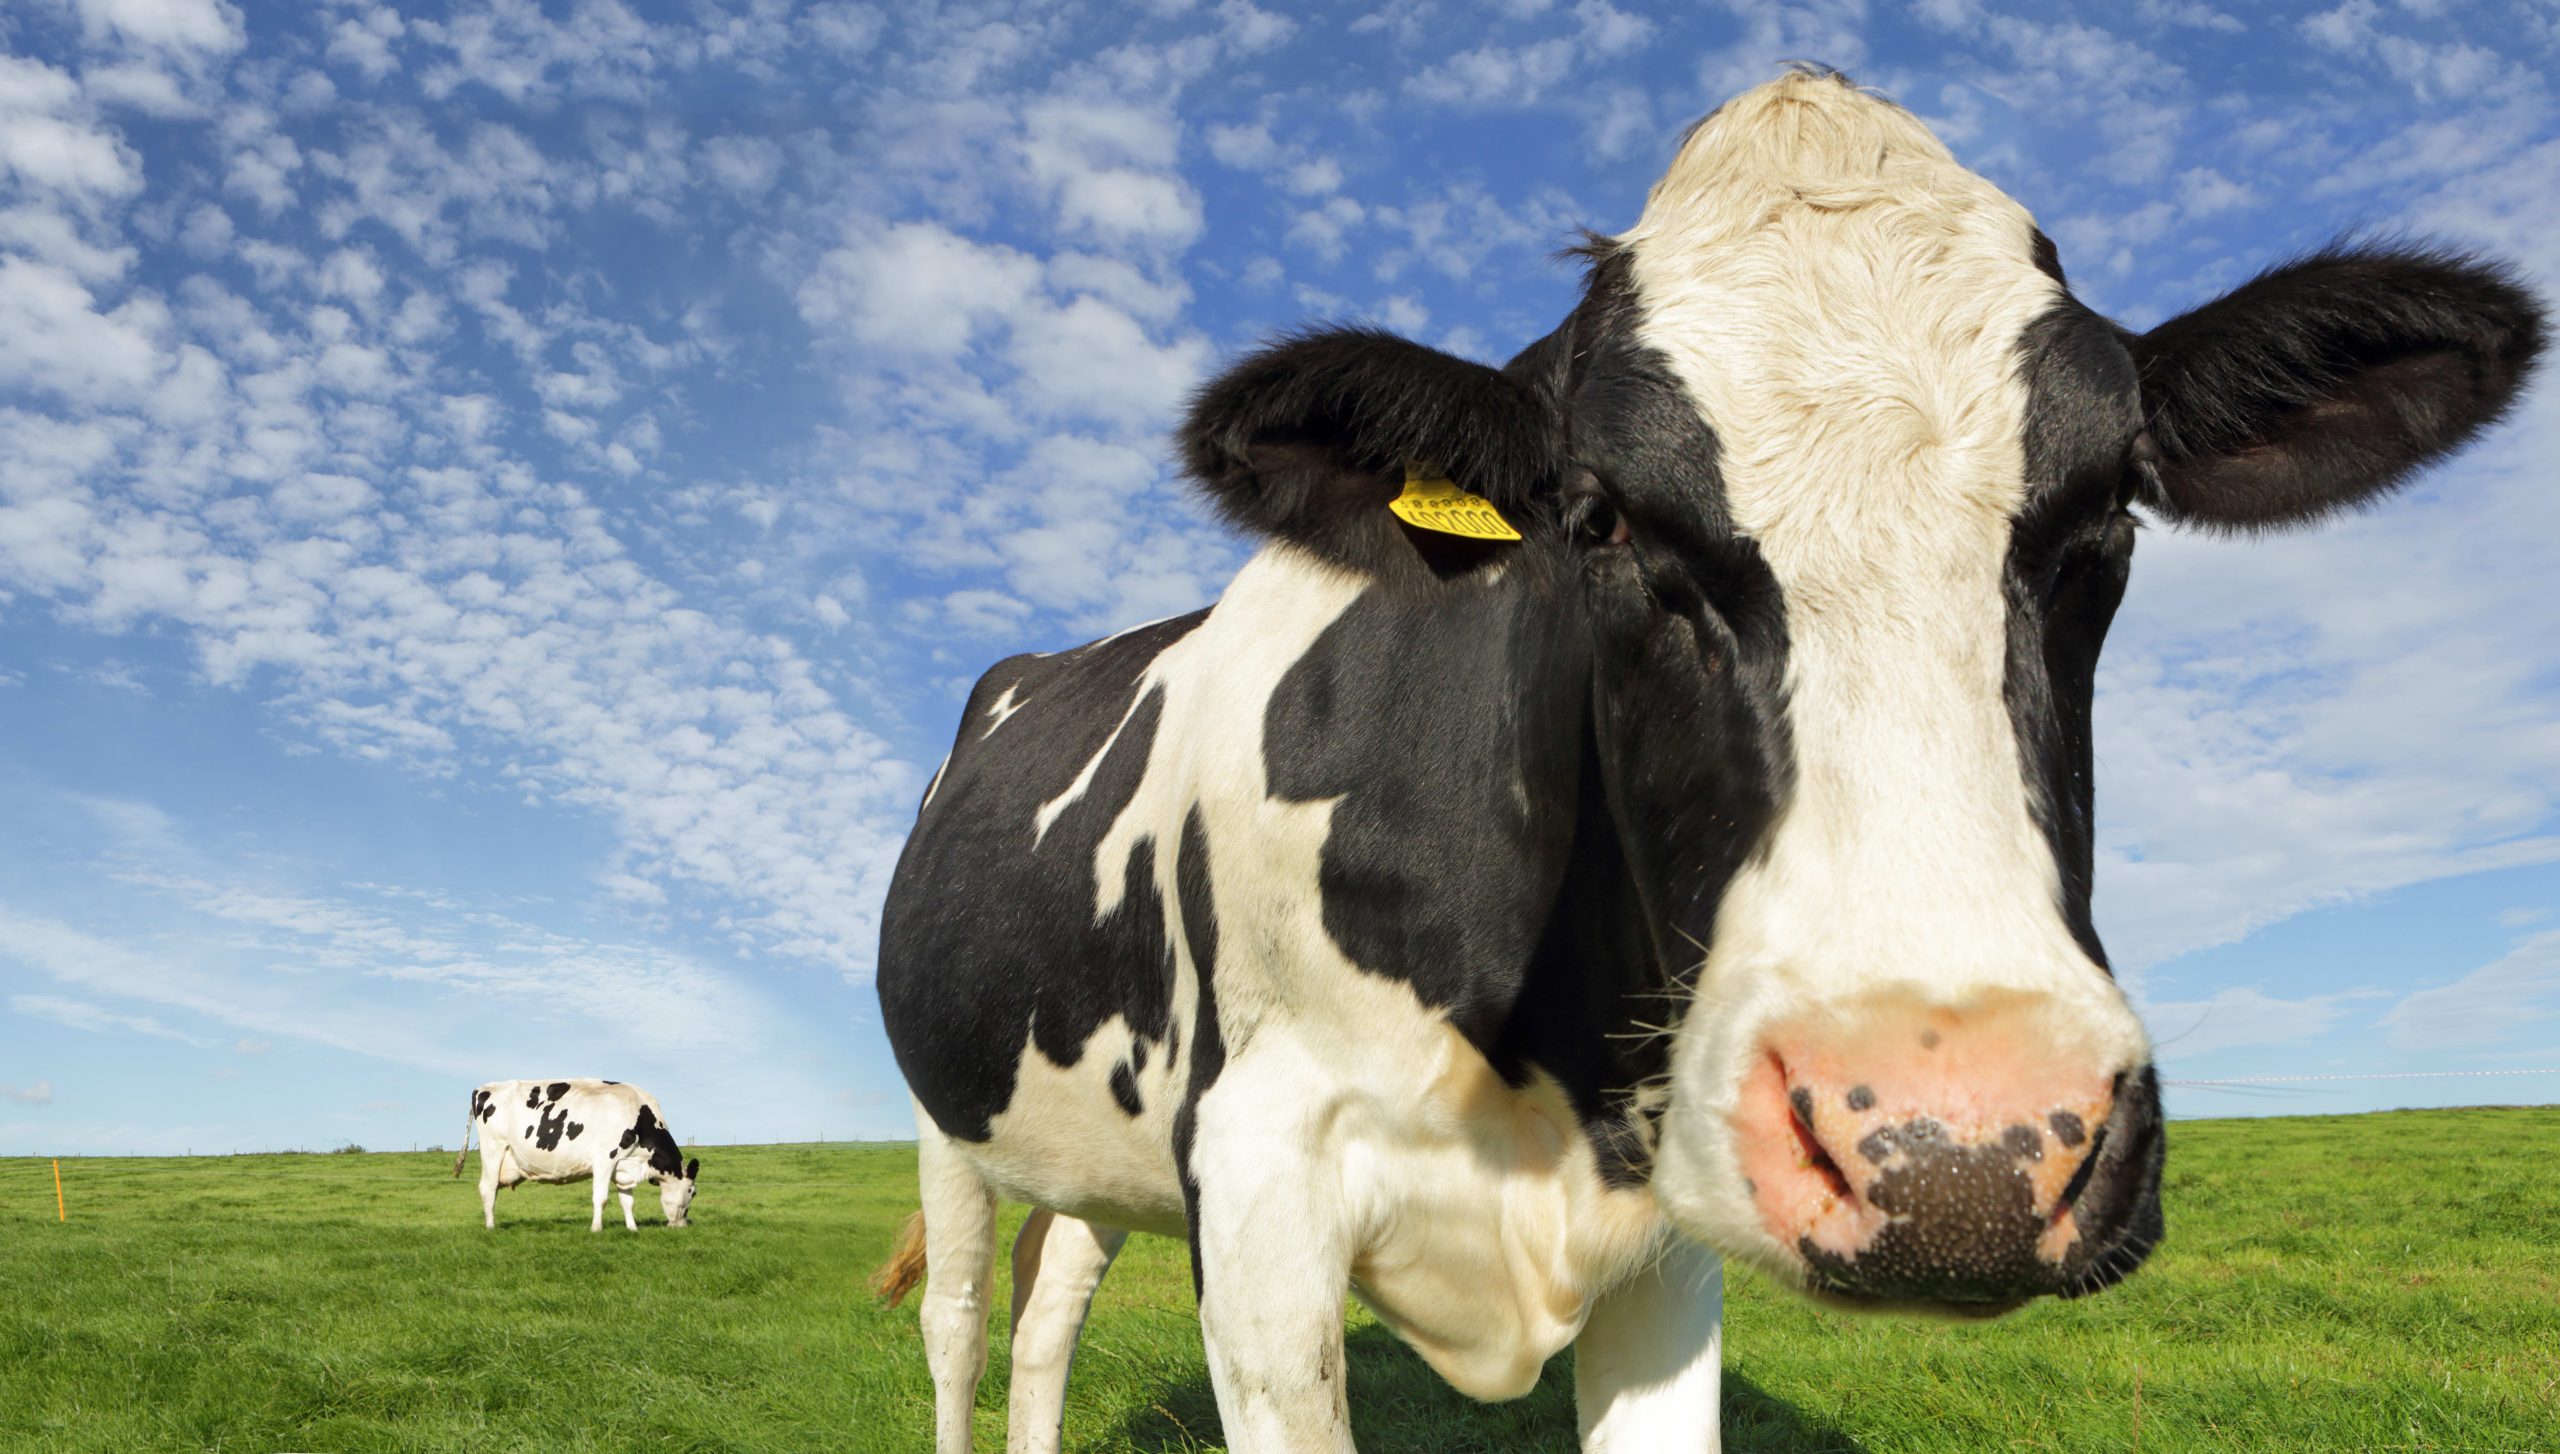 Dairy agency hoping to energy supply vehicles with cow manure